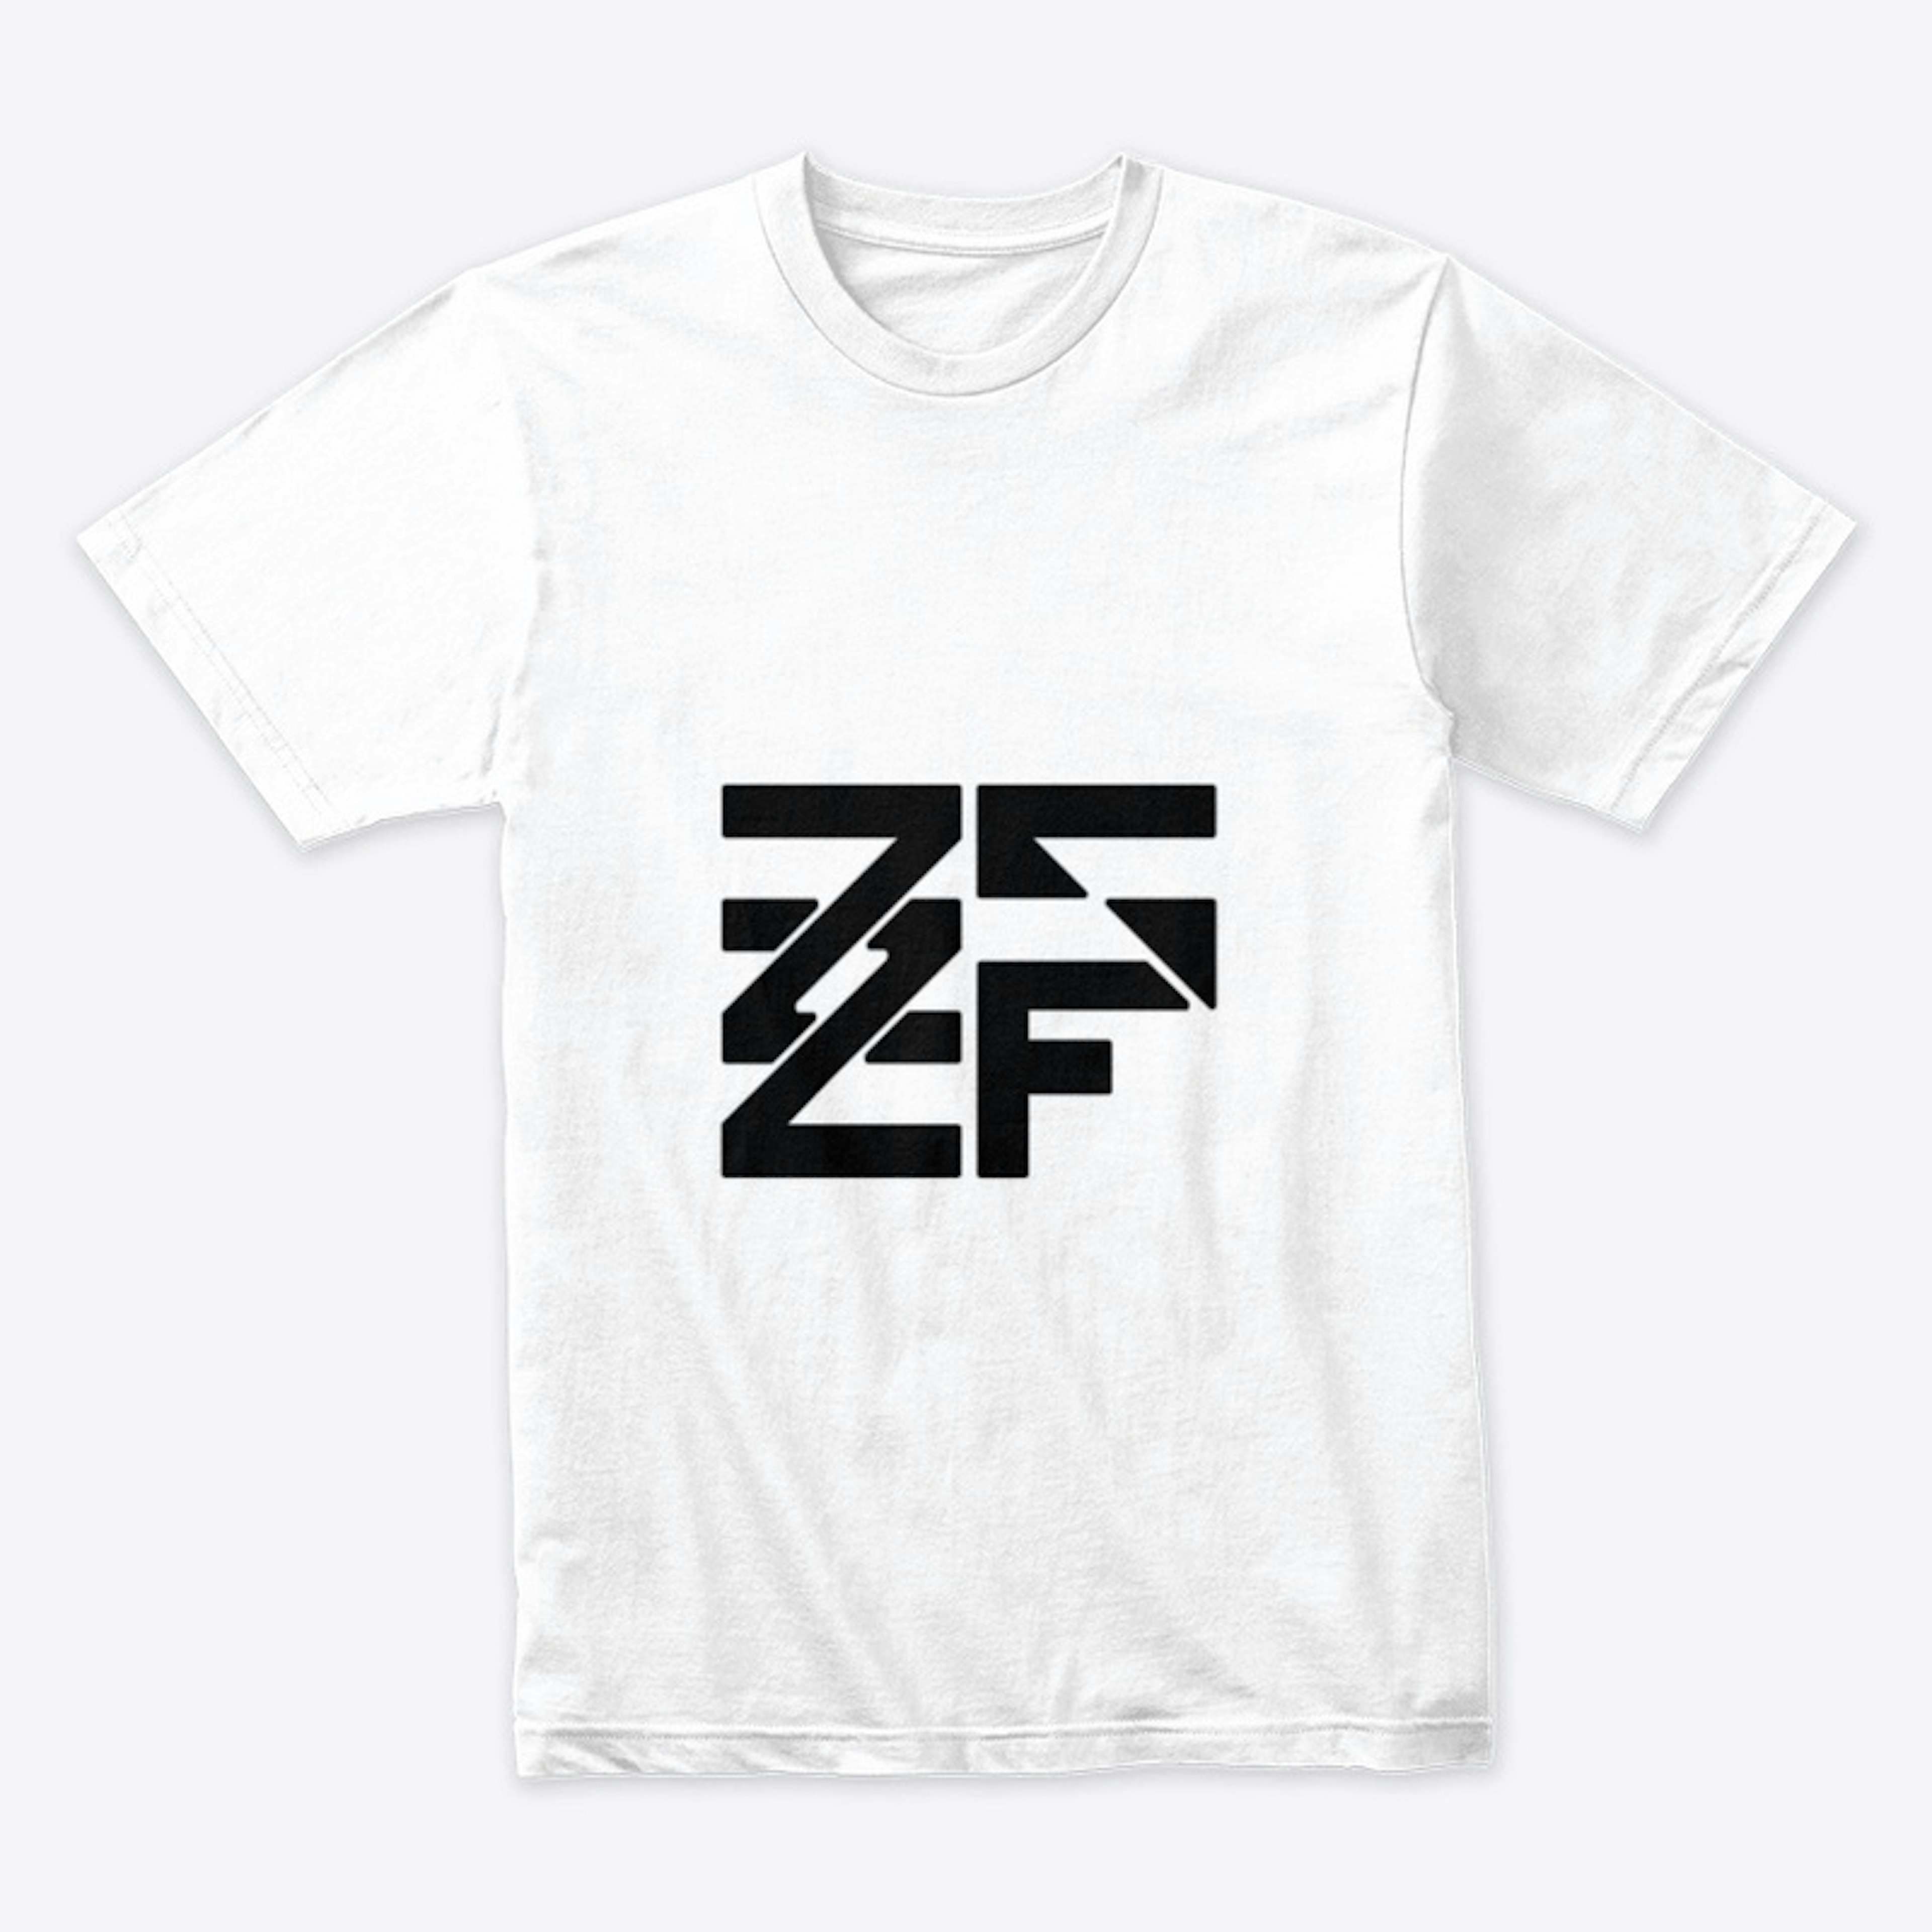 The ZSZF Brand